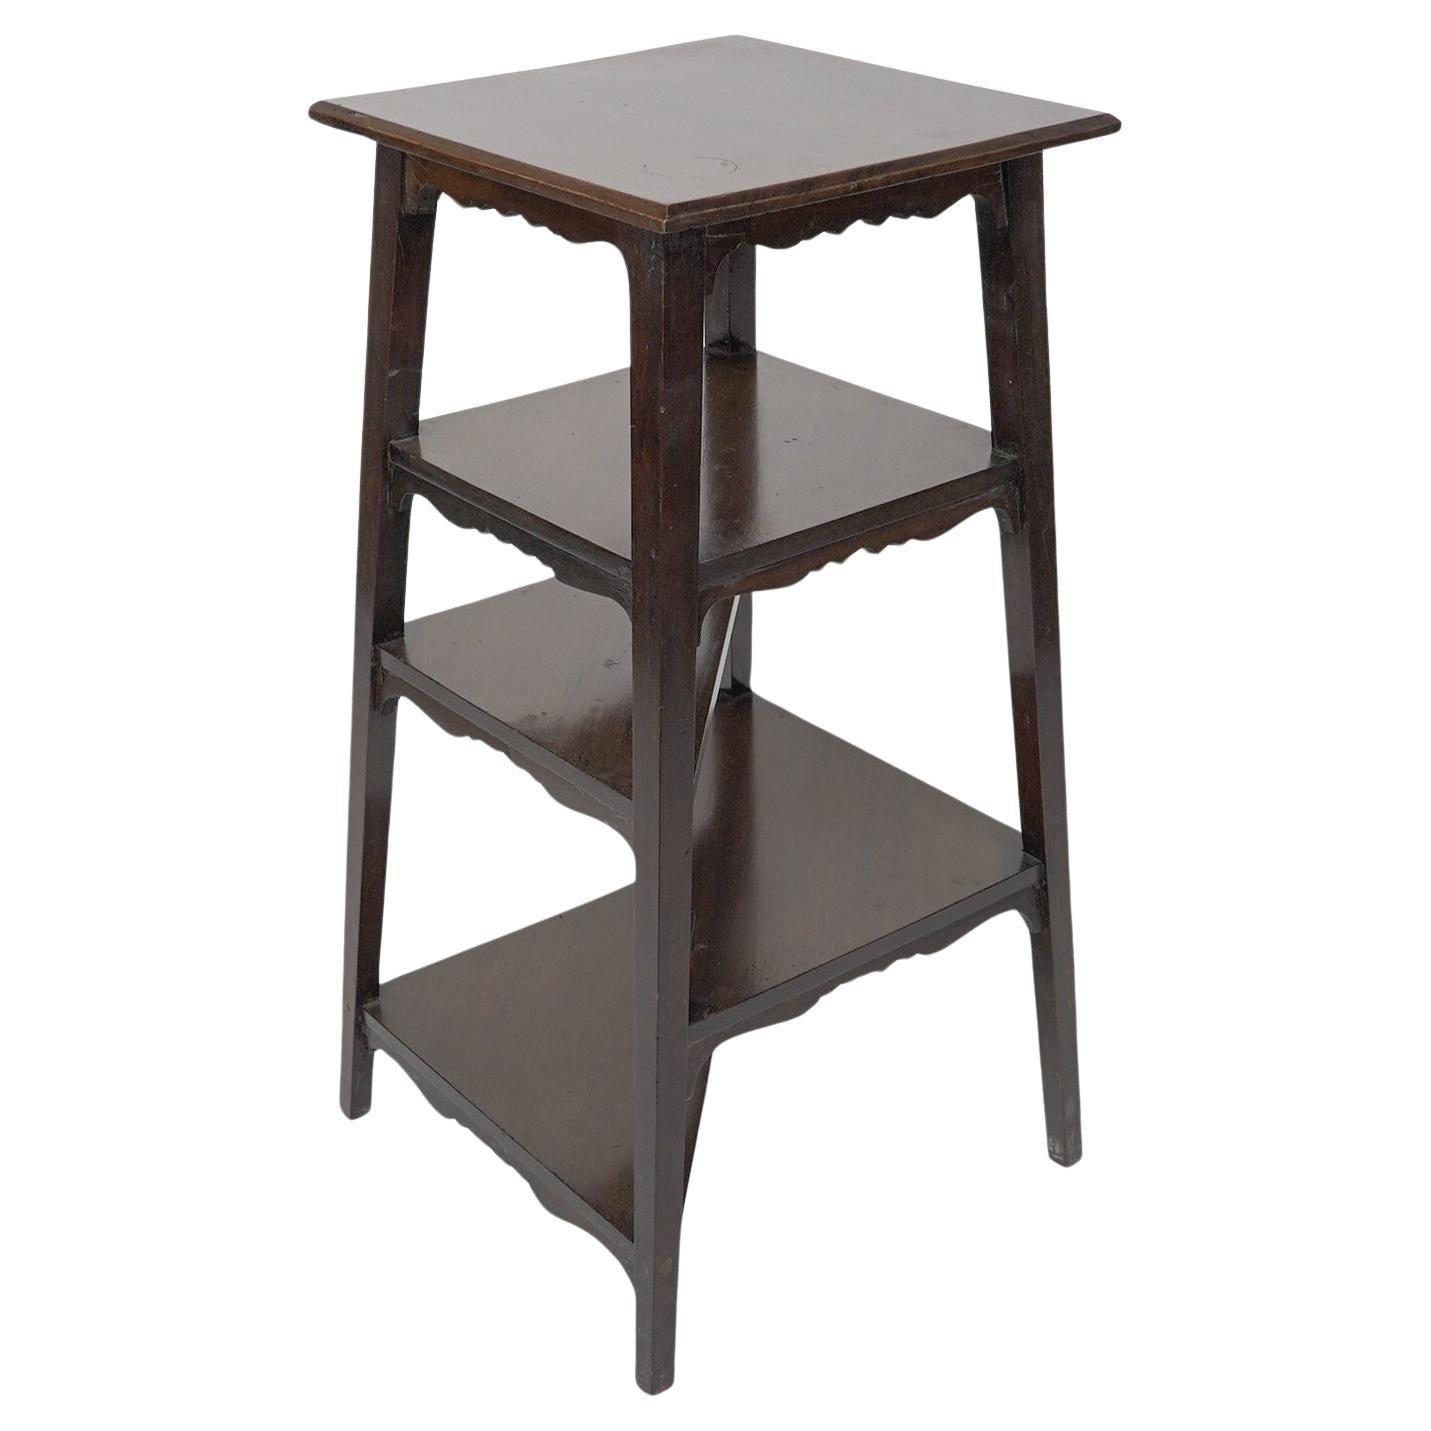 Aesthetic Movement Walnut side table wot-not-stand with half triangle shelves. For Sale